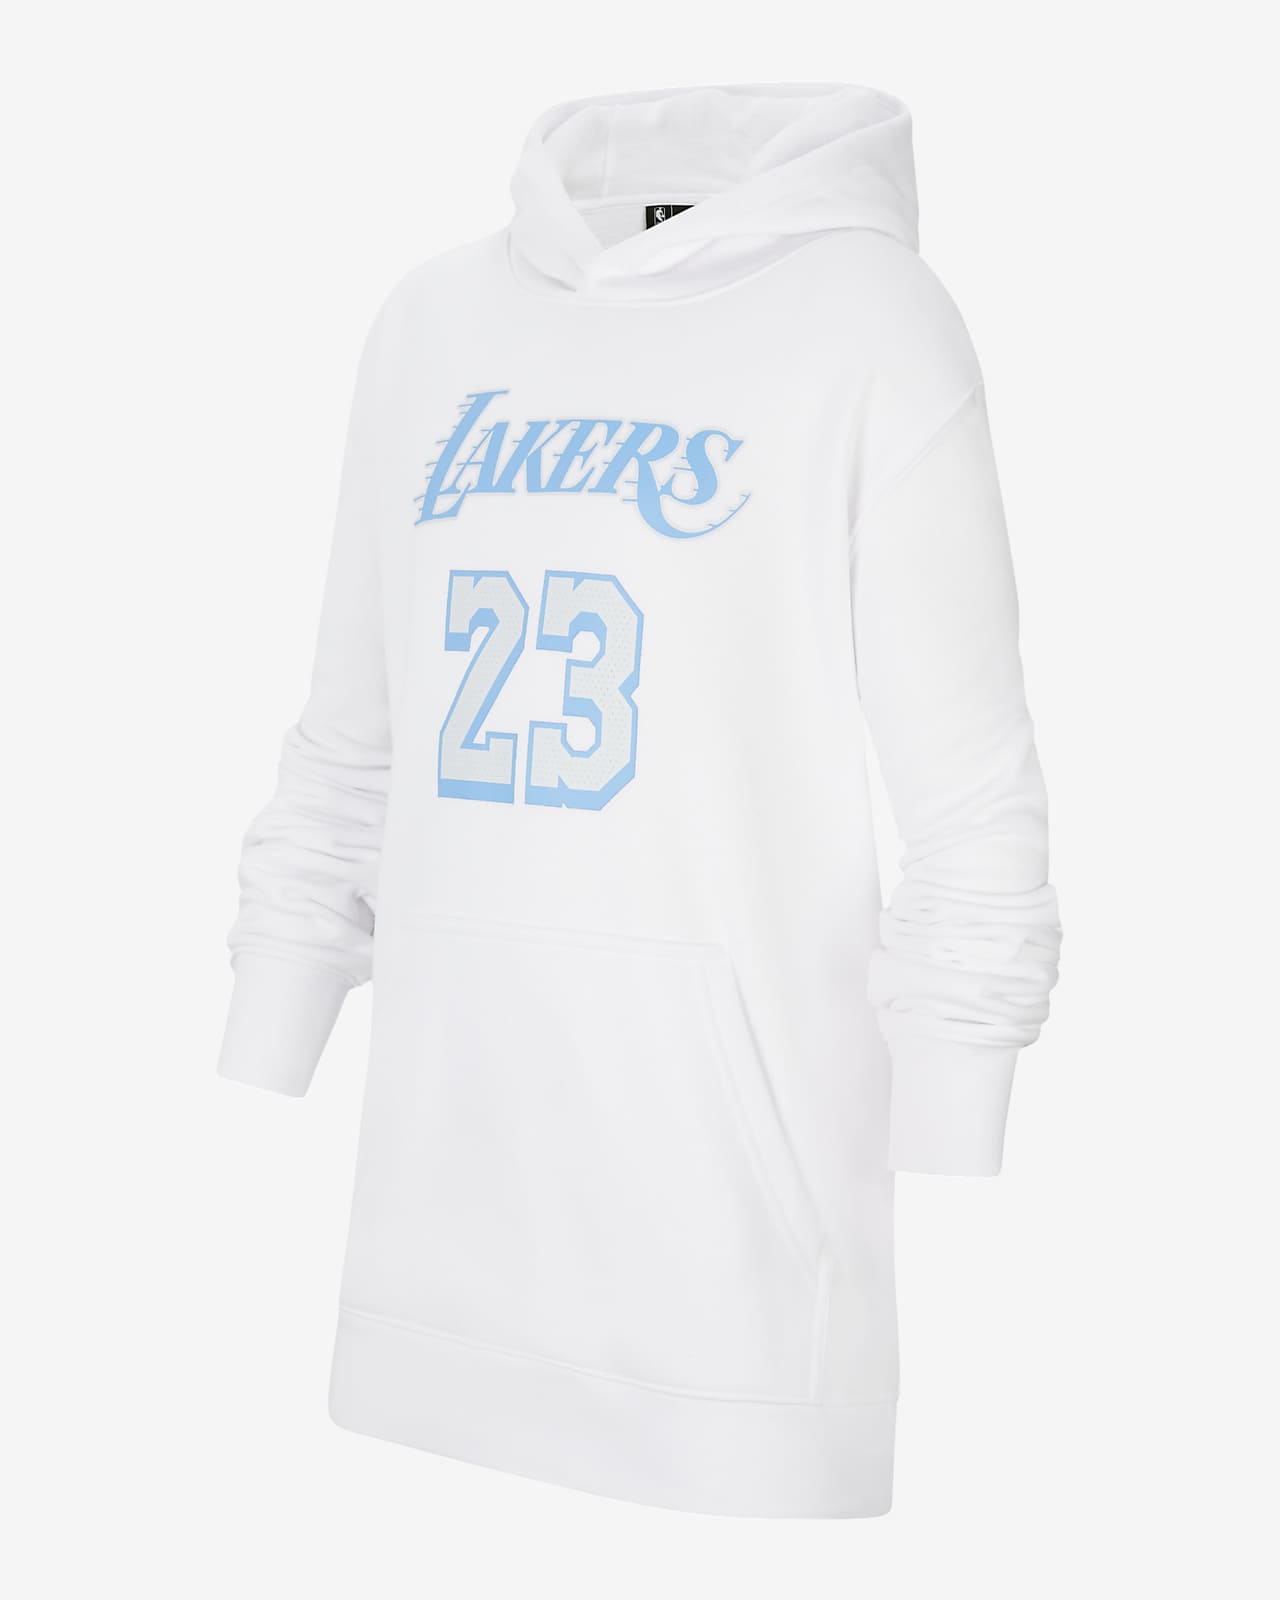 LeBron James Lakers City Edition Older 